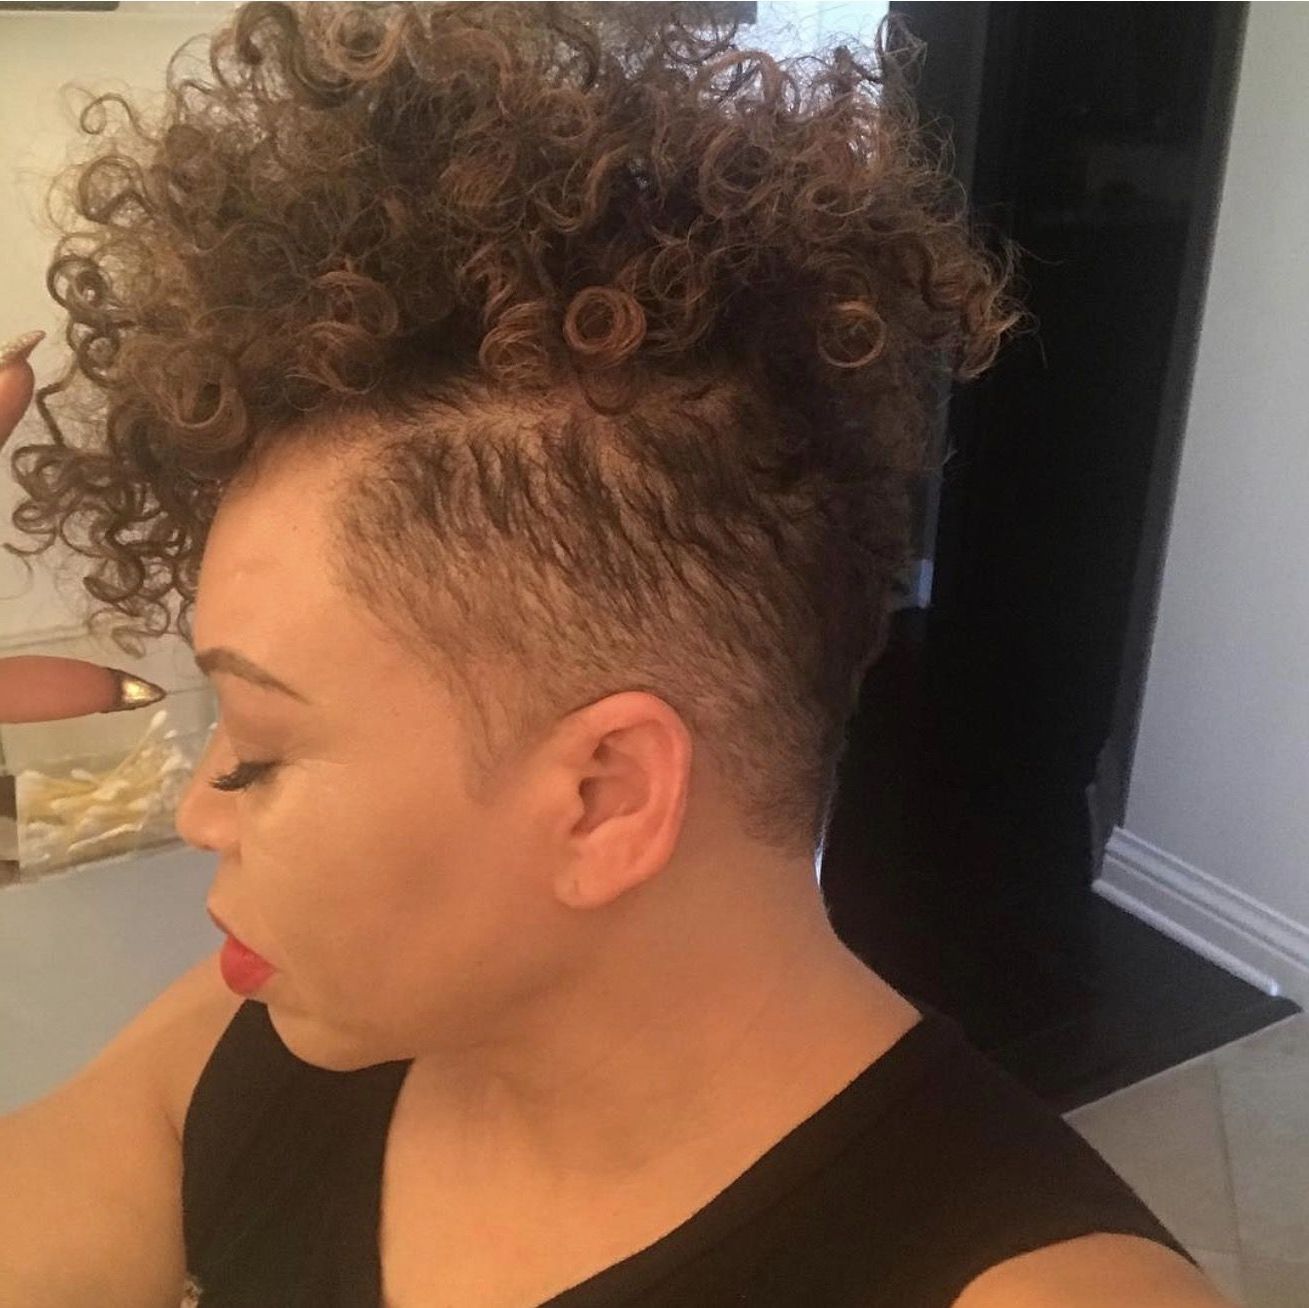 [%2020 Asymmetrical Chop Mohawk  Haircuts Intended For Tisha Campbell Martin Rocking A New Short Do [pics] | Short|tisha Campbell Martin Rocking A New Short Do [pics] | Short Intended For Widely Used Asymmetrical Chop Mohawk  Haircuts%] (View 10 of 20)